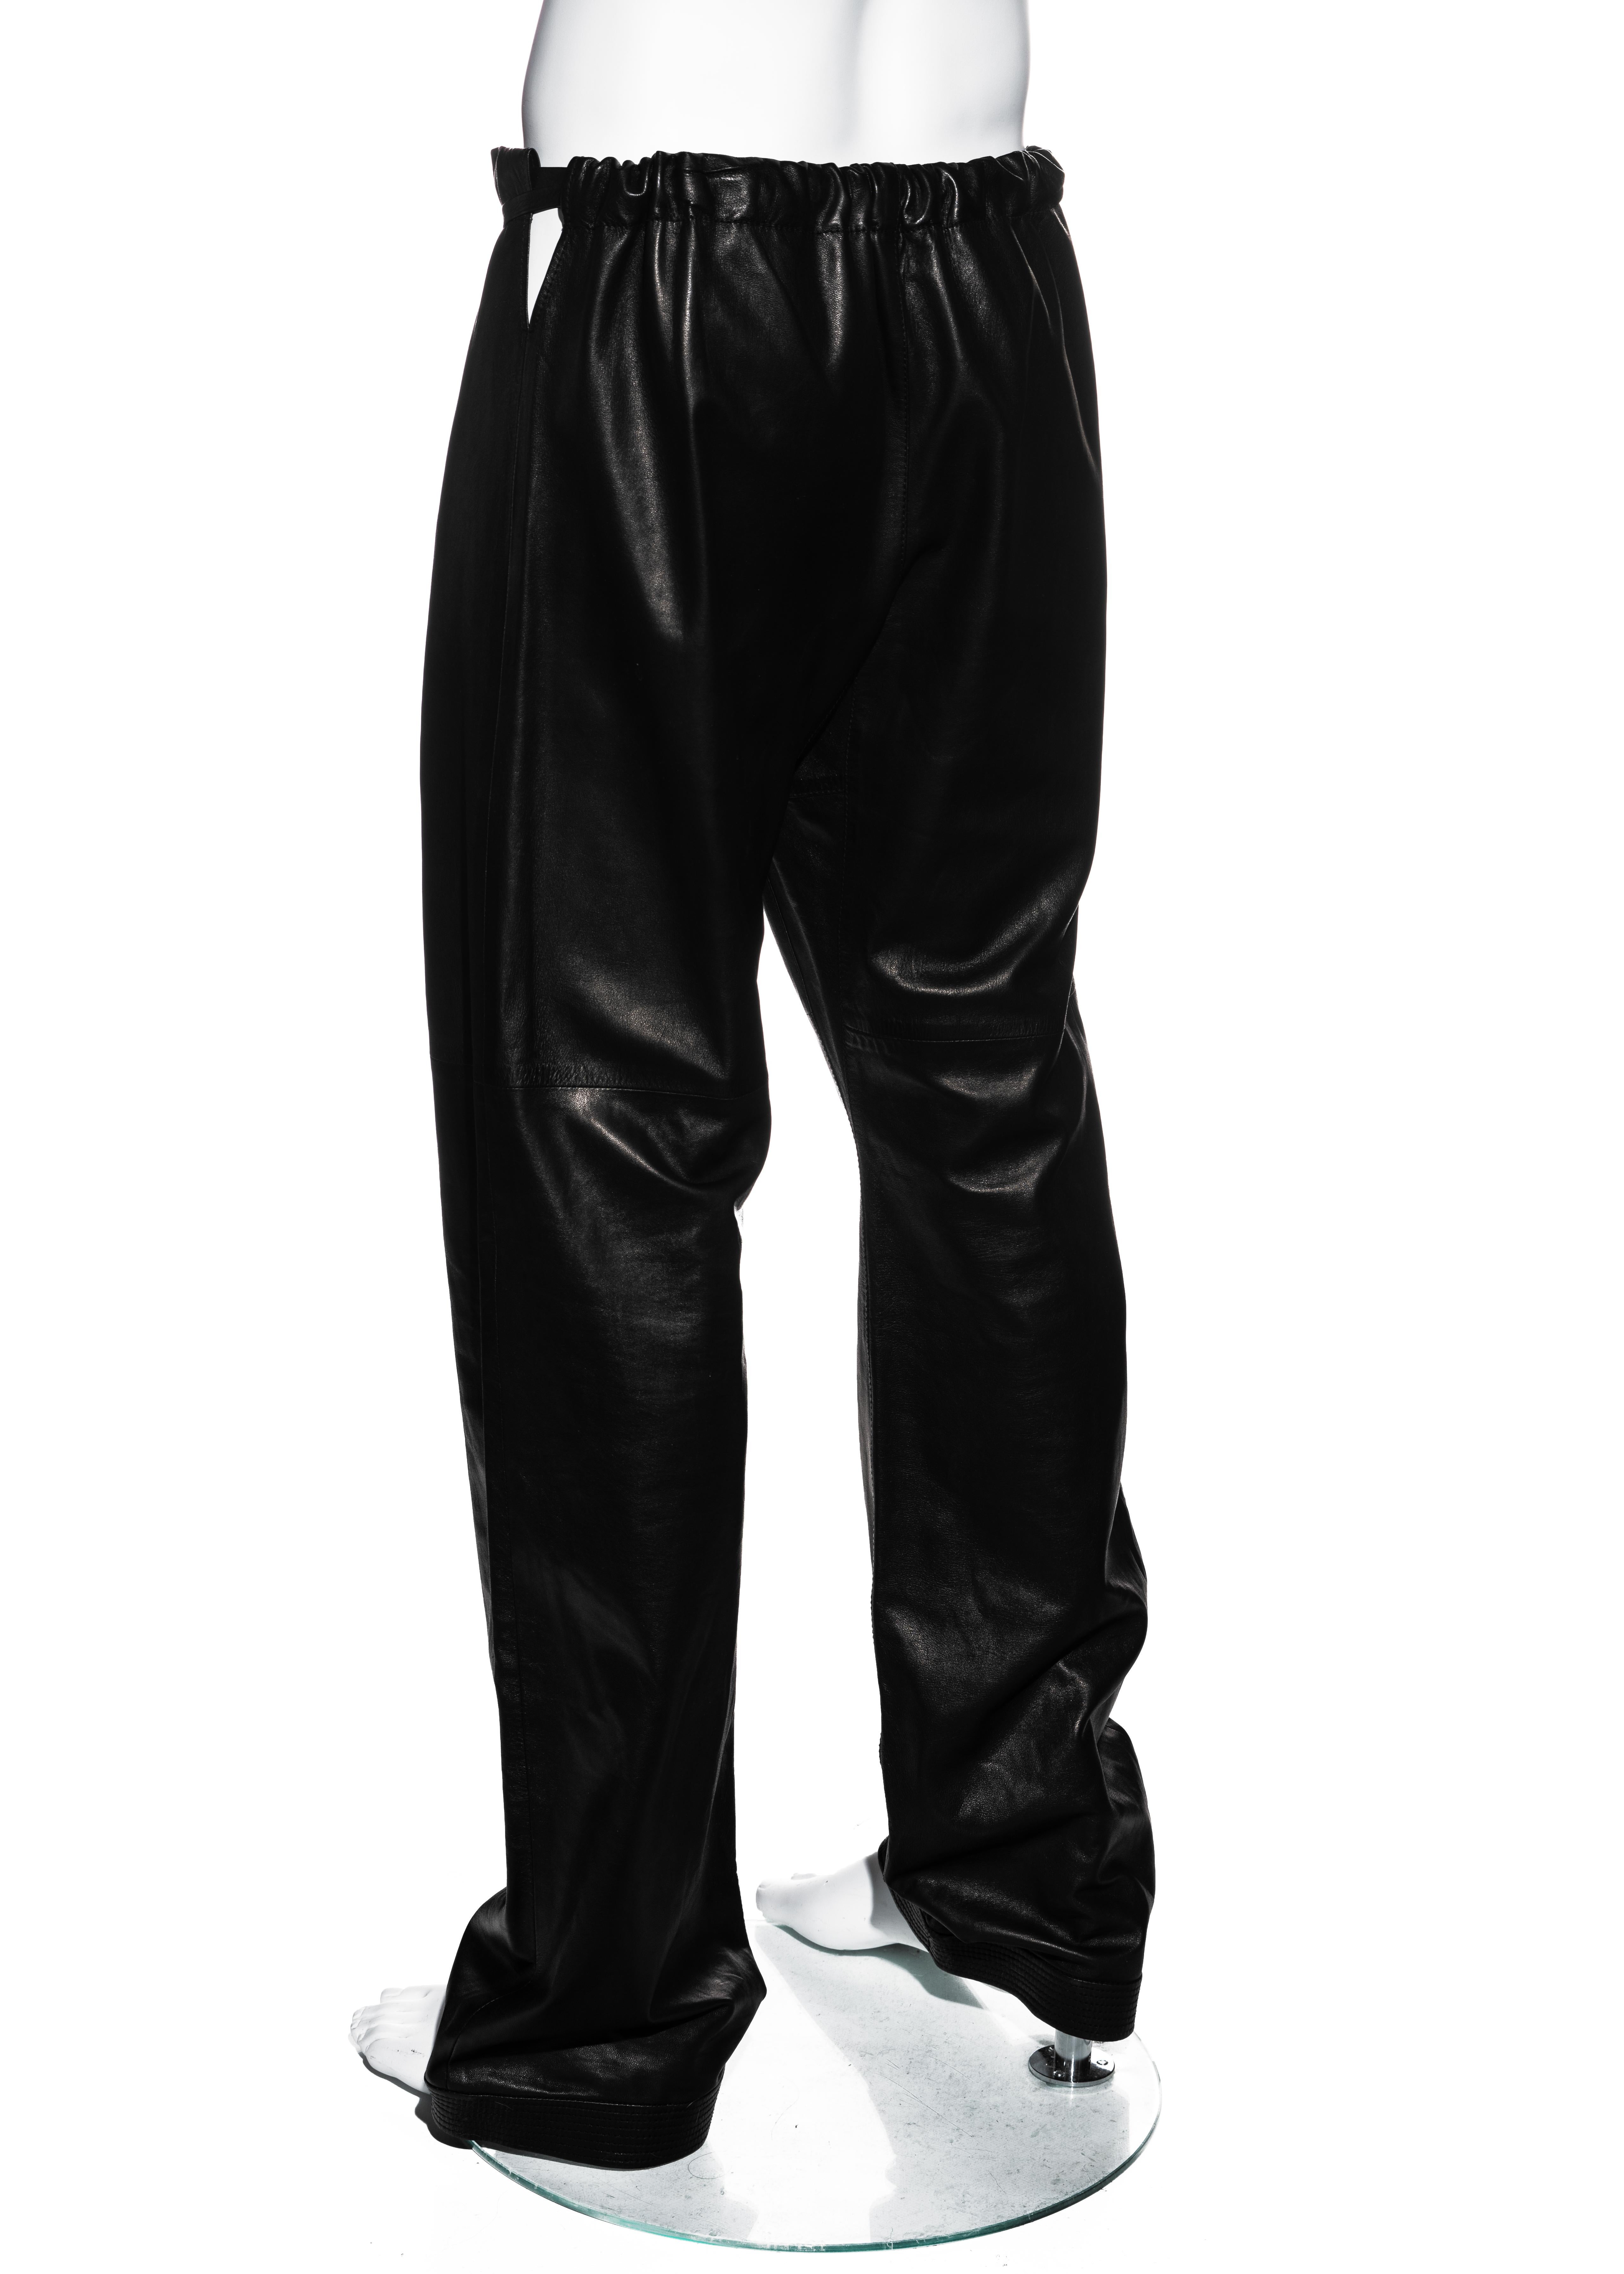 Gucci by Tom Ford unisex black lambskin leather wide-leg pants, ss 2001 2